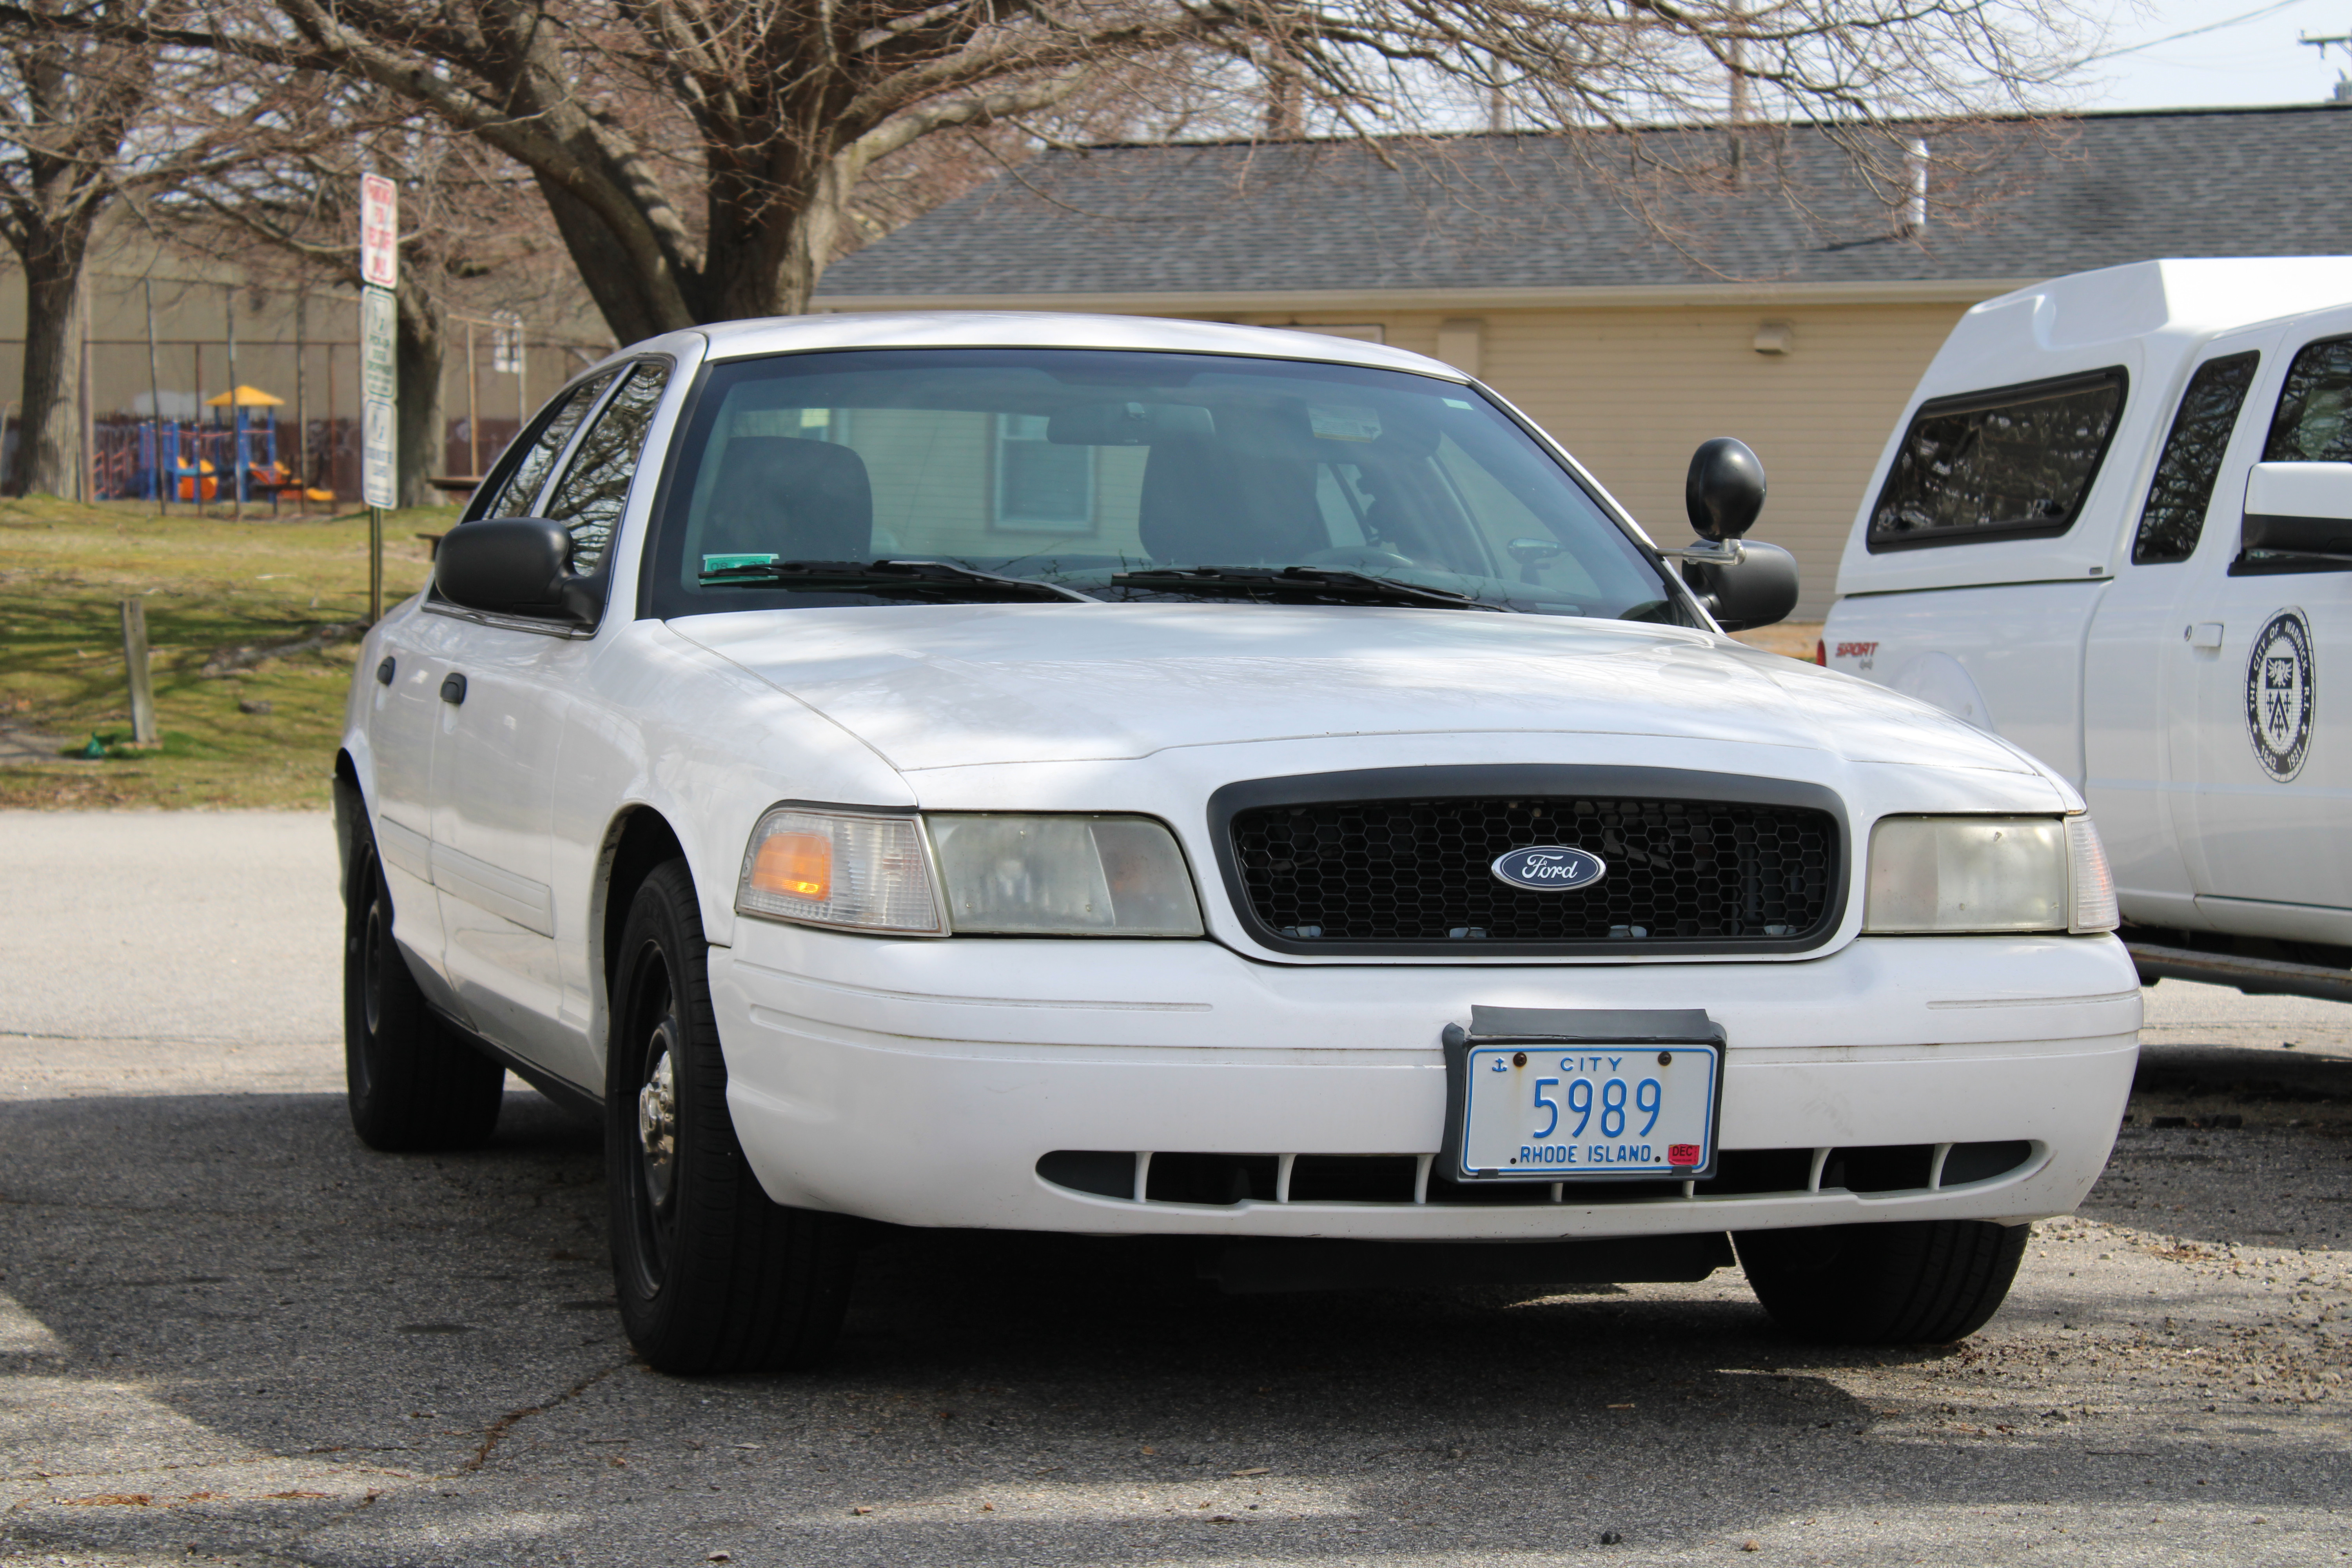 A photo  of Warwick Public Works
            Car 5989, a 2009-2011 Ford Crown Victoria Police Interceptor             taken by @riemergencyvehicles